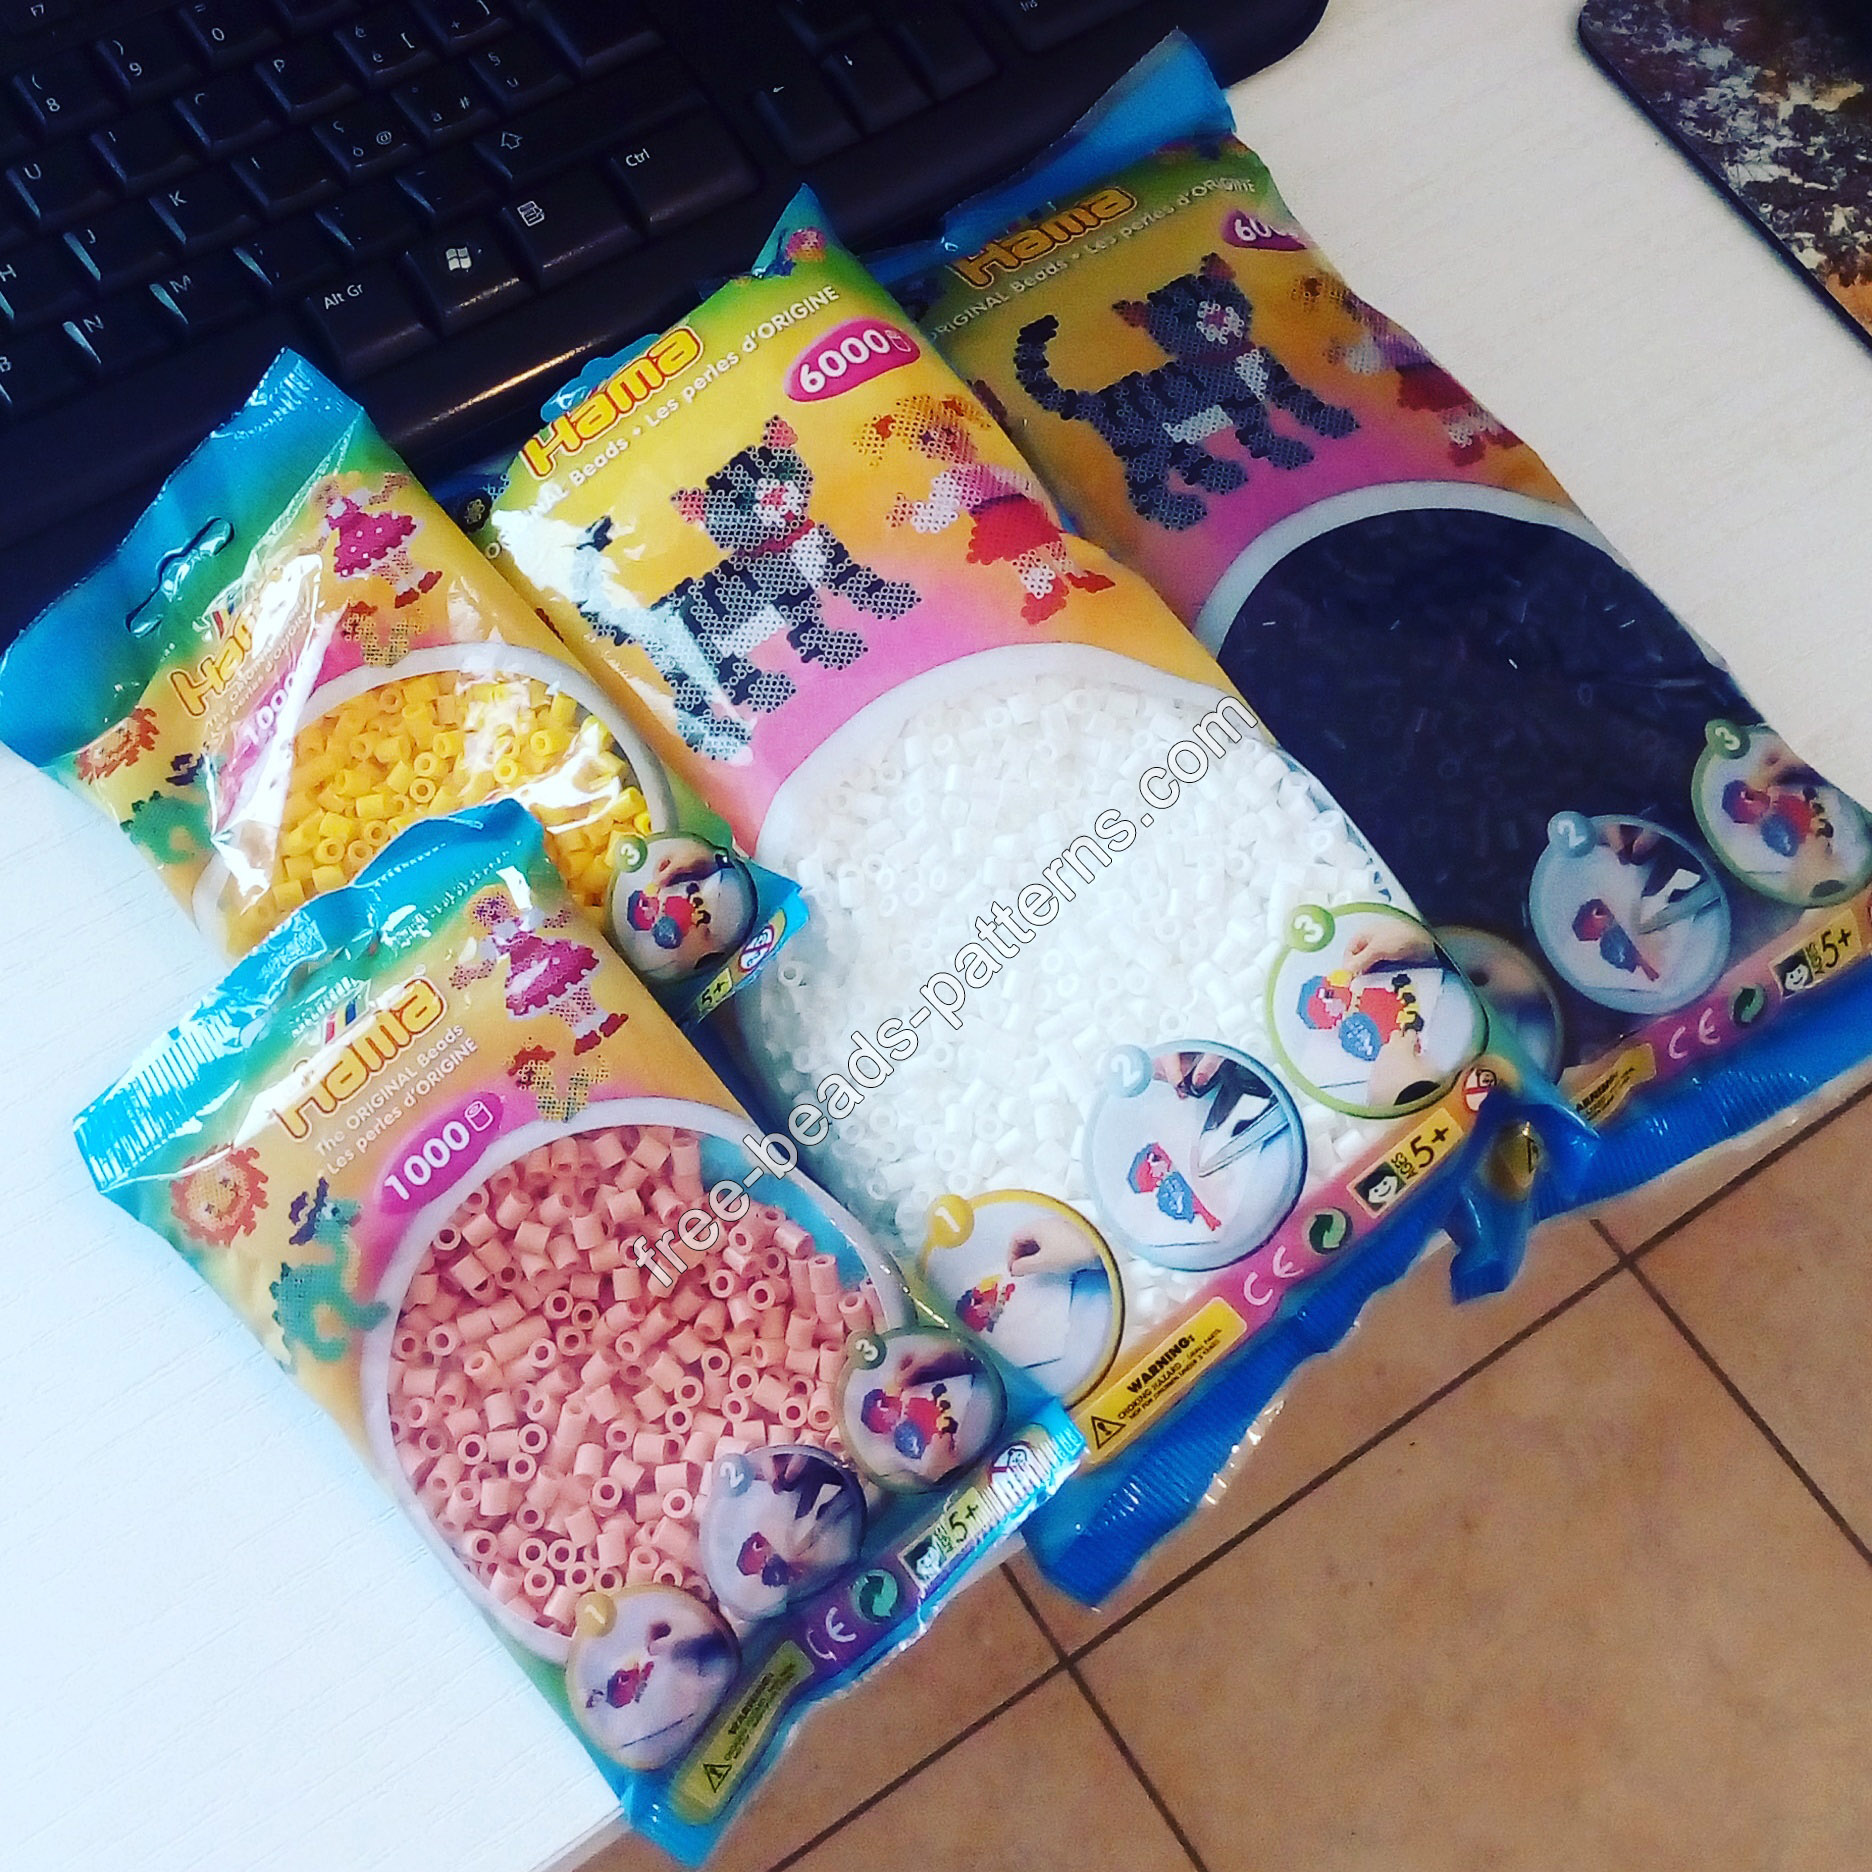 Hama Beads 6000 bags just arrived